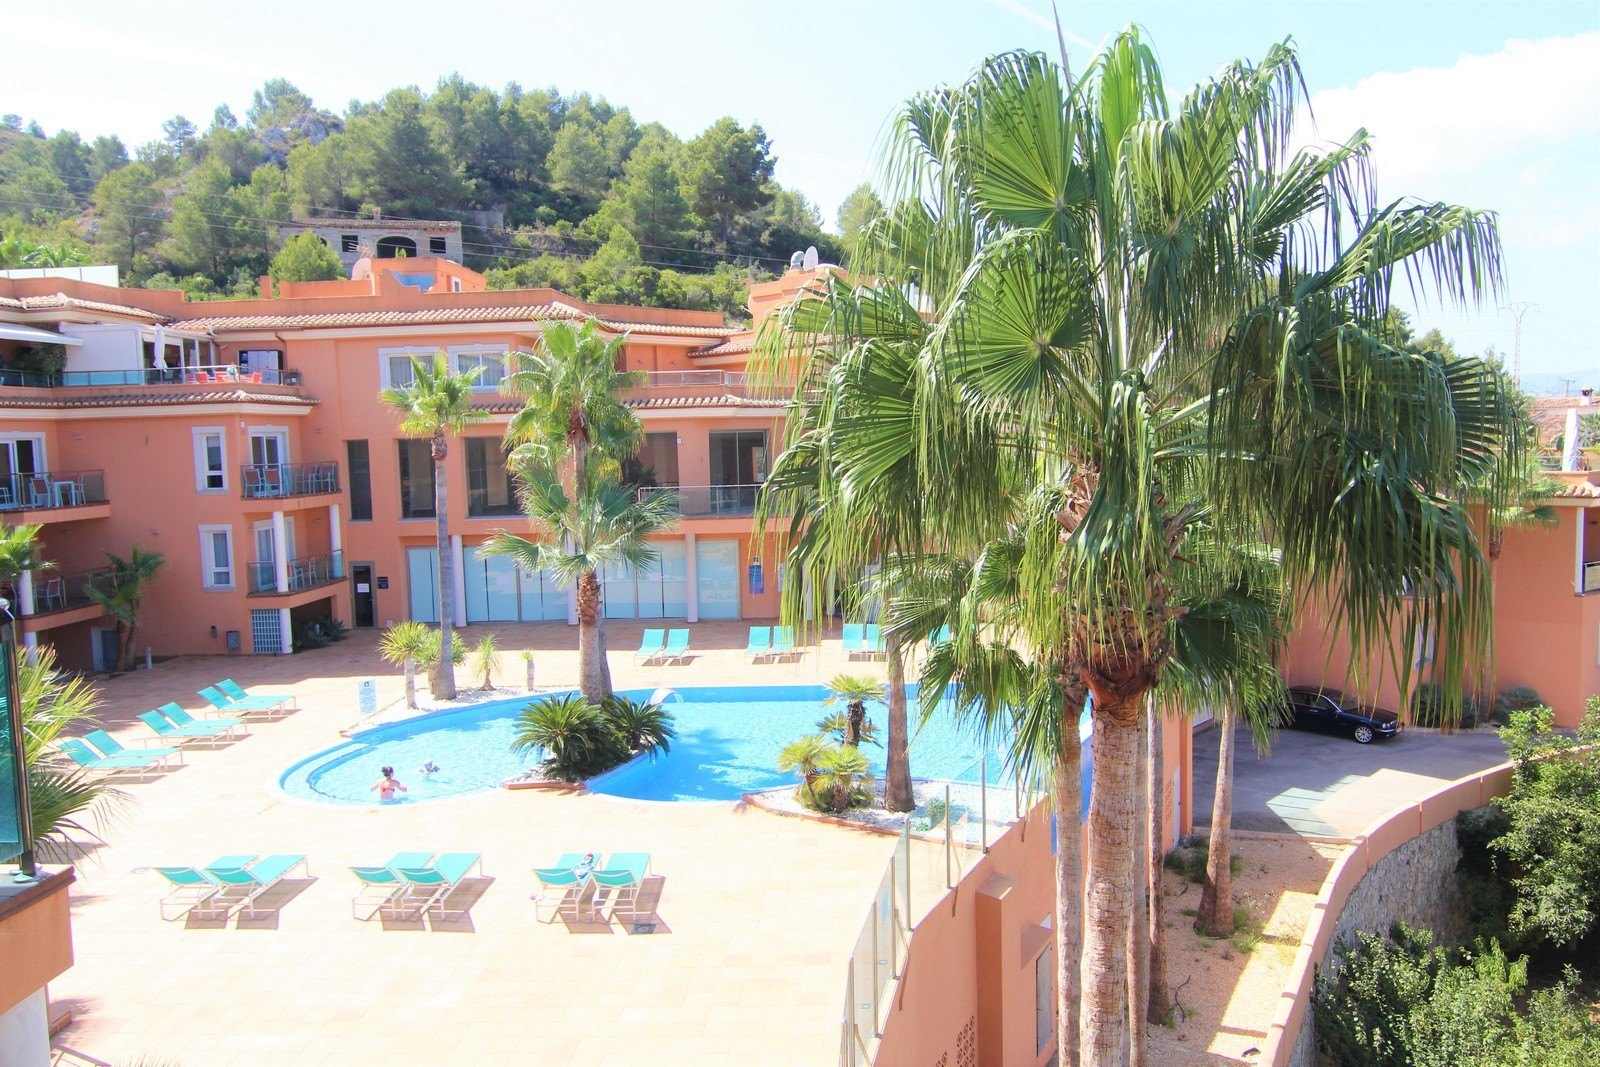 Apartment for sale with pool in Calistros Benitatxell.